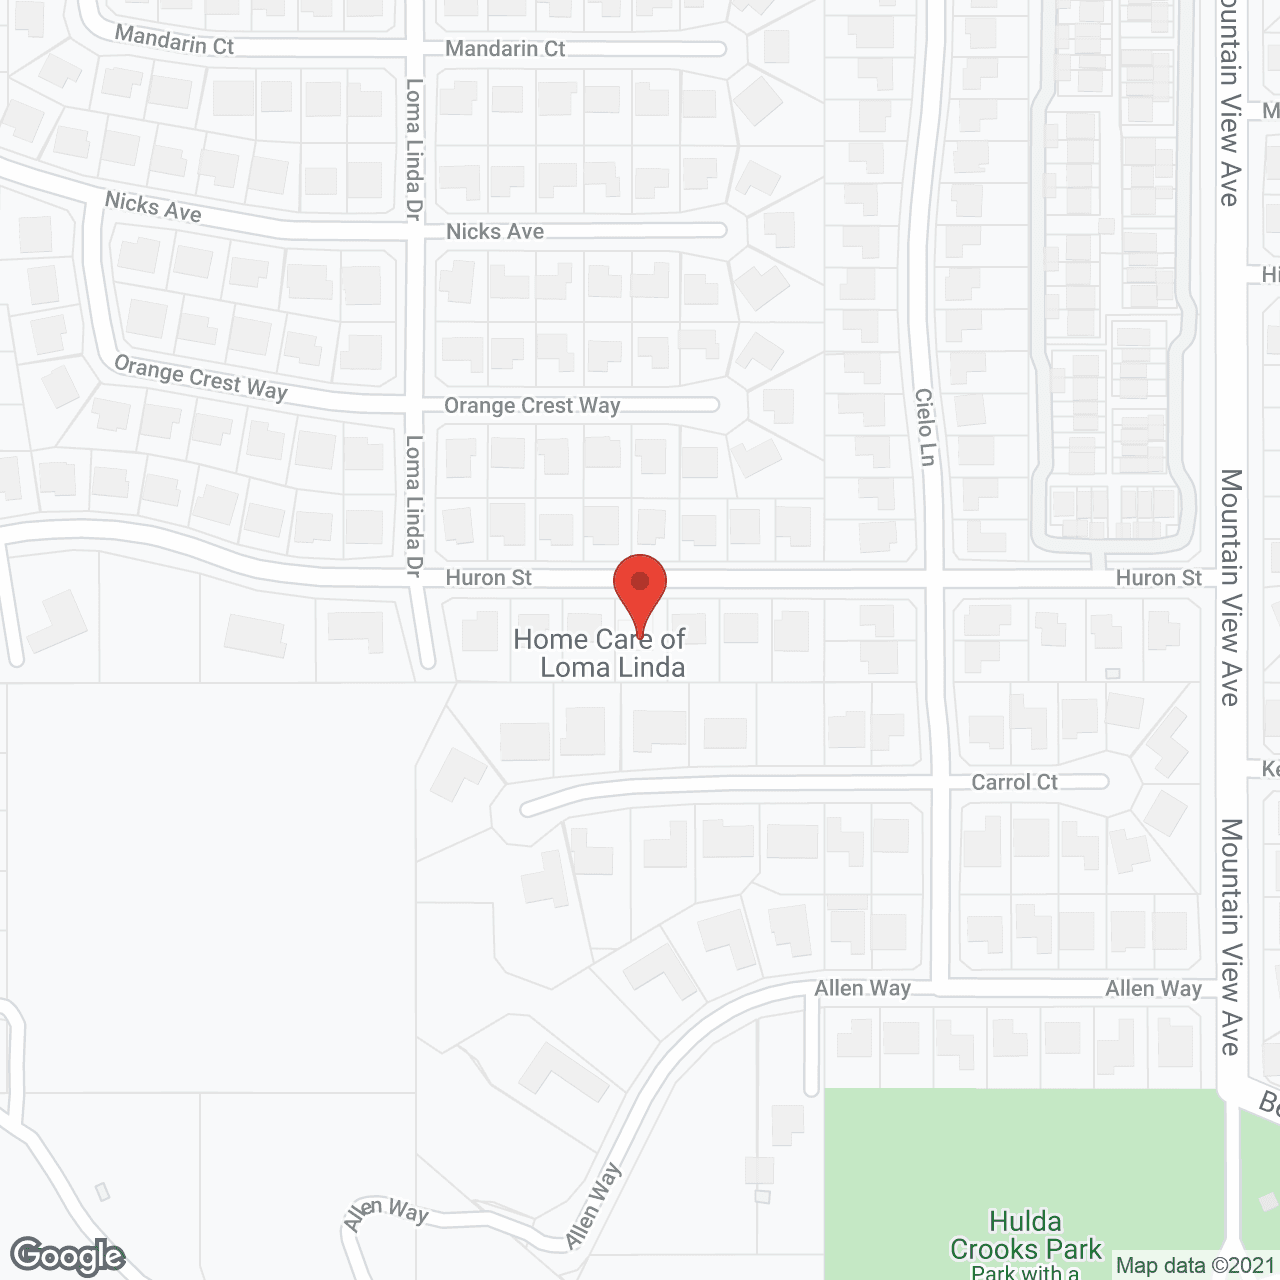 Home Care of Loma Linda in google map